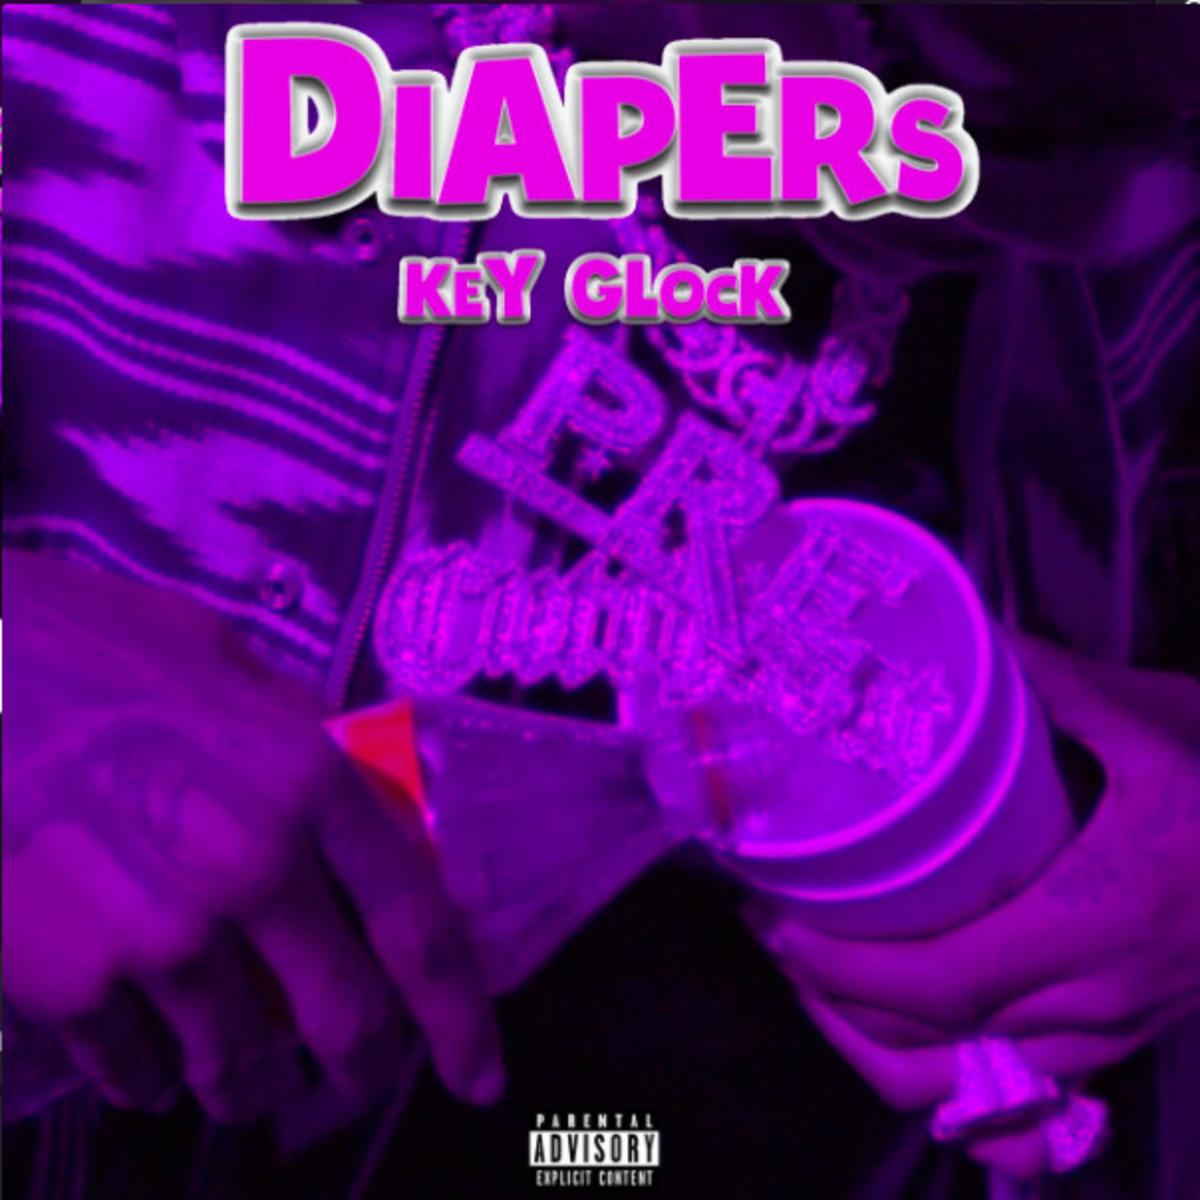 Key Glock Returns With “Diapers”